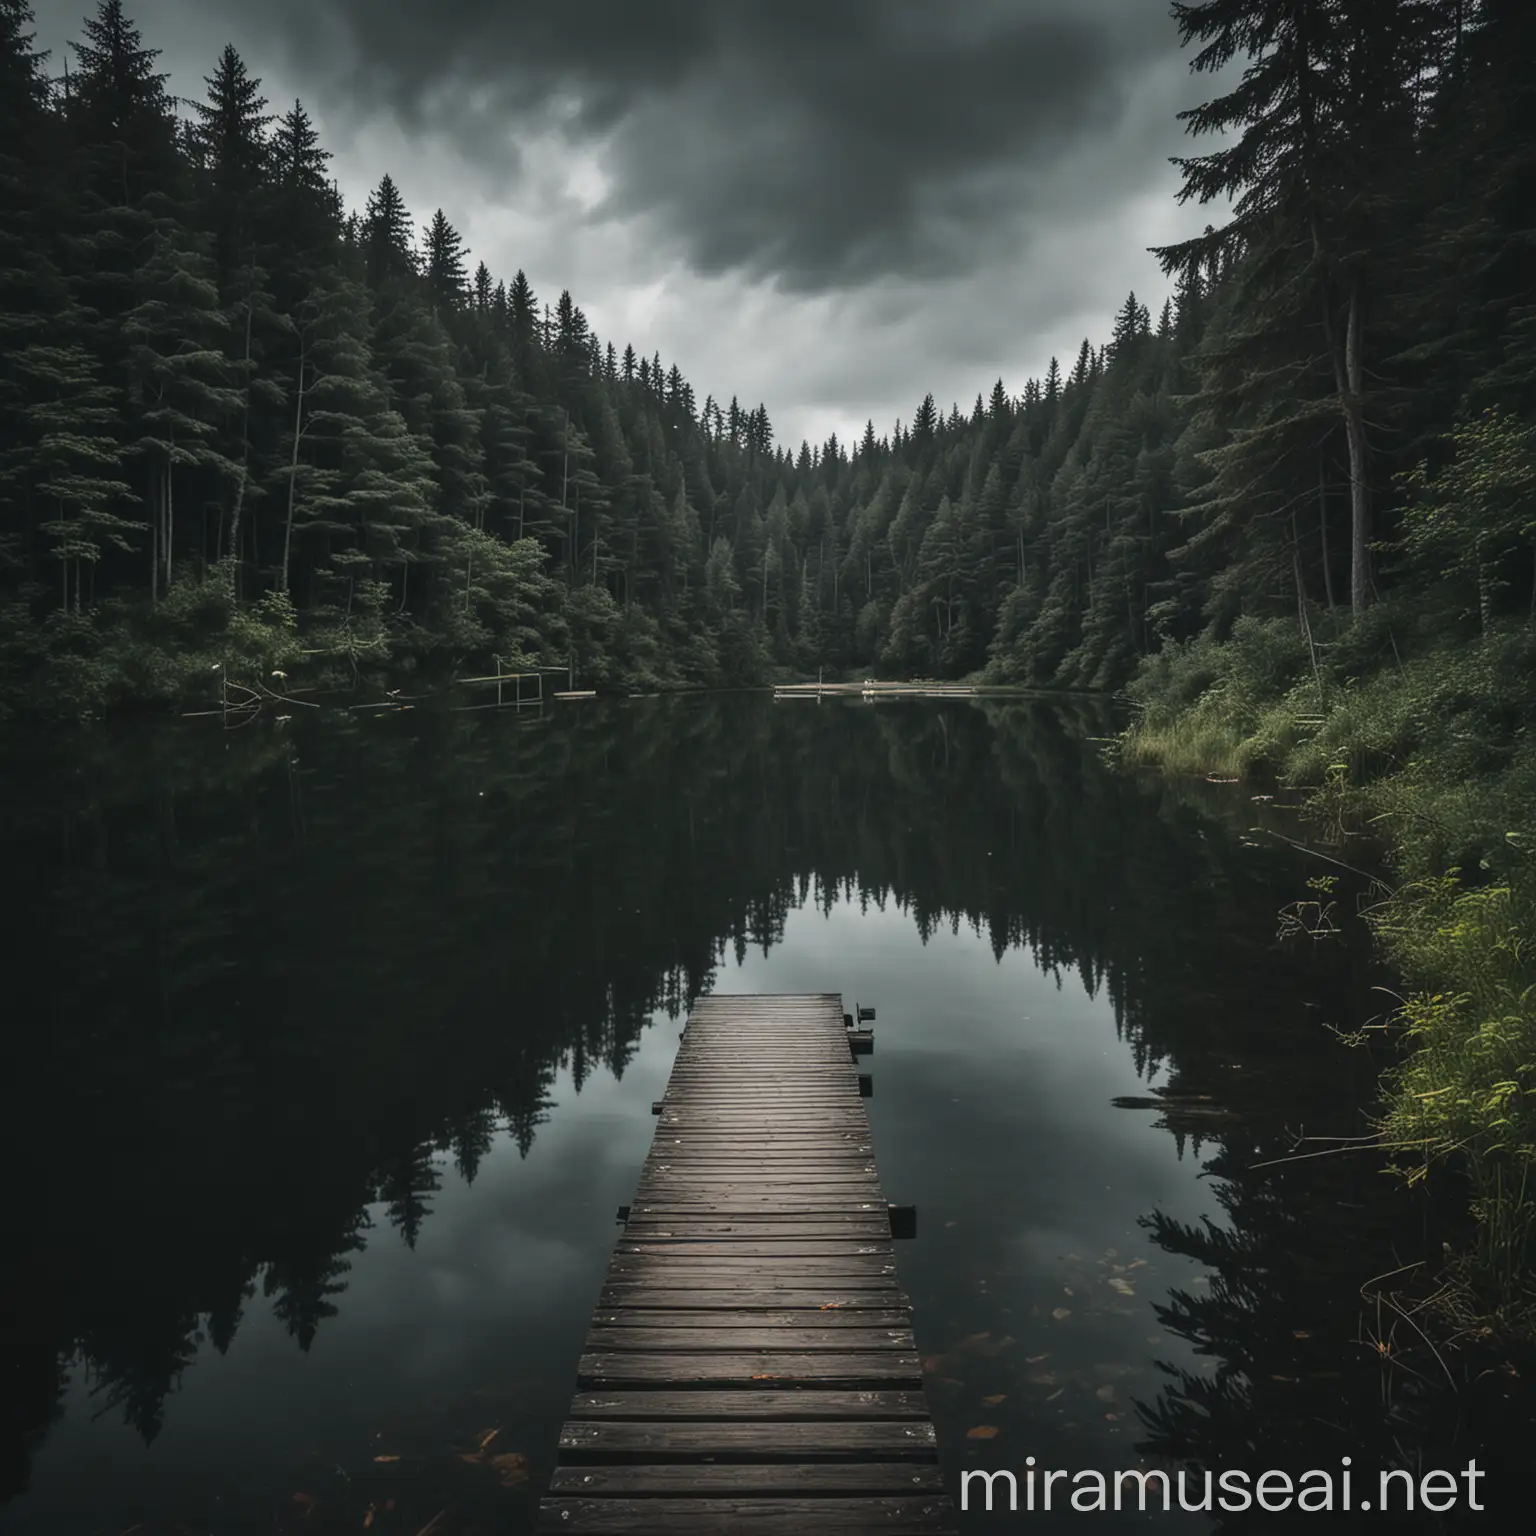 image of a lake surrounded by forest and a small dock with a dark atmosphere
